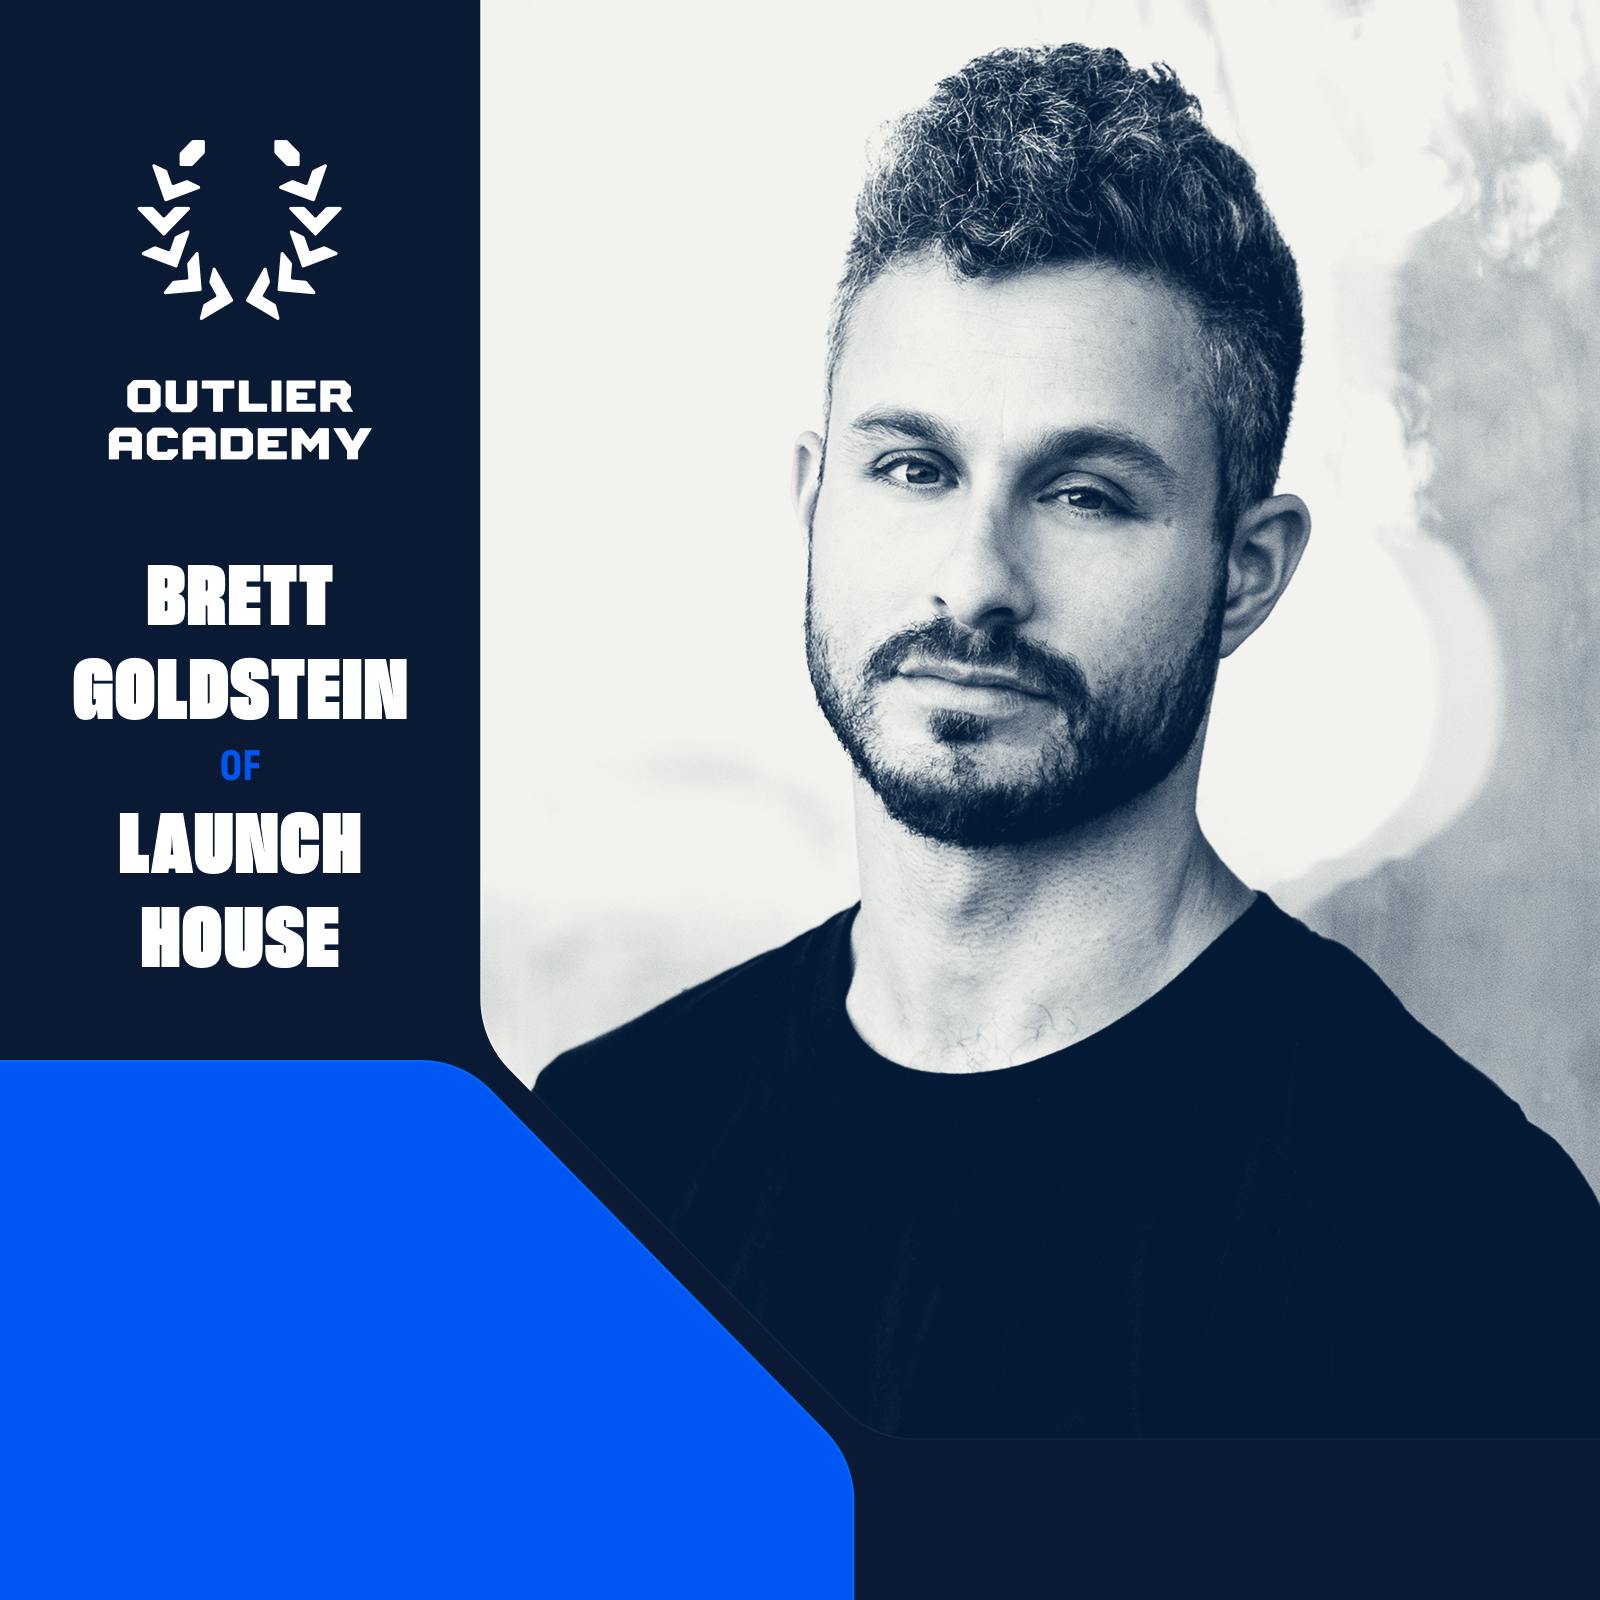 #80 Launch House: Building the Y Combinator of the Future with Hack and Launch Houses | Brett Goldstein, Co-Founder Image